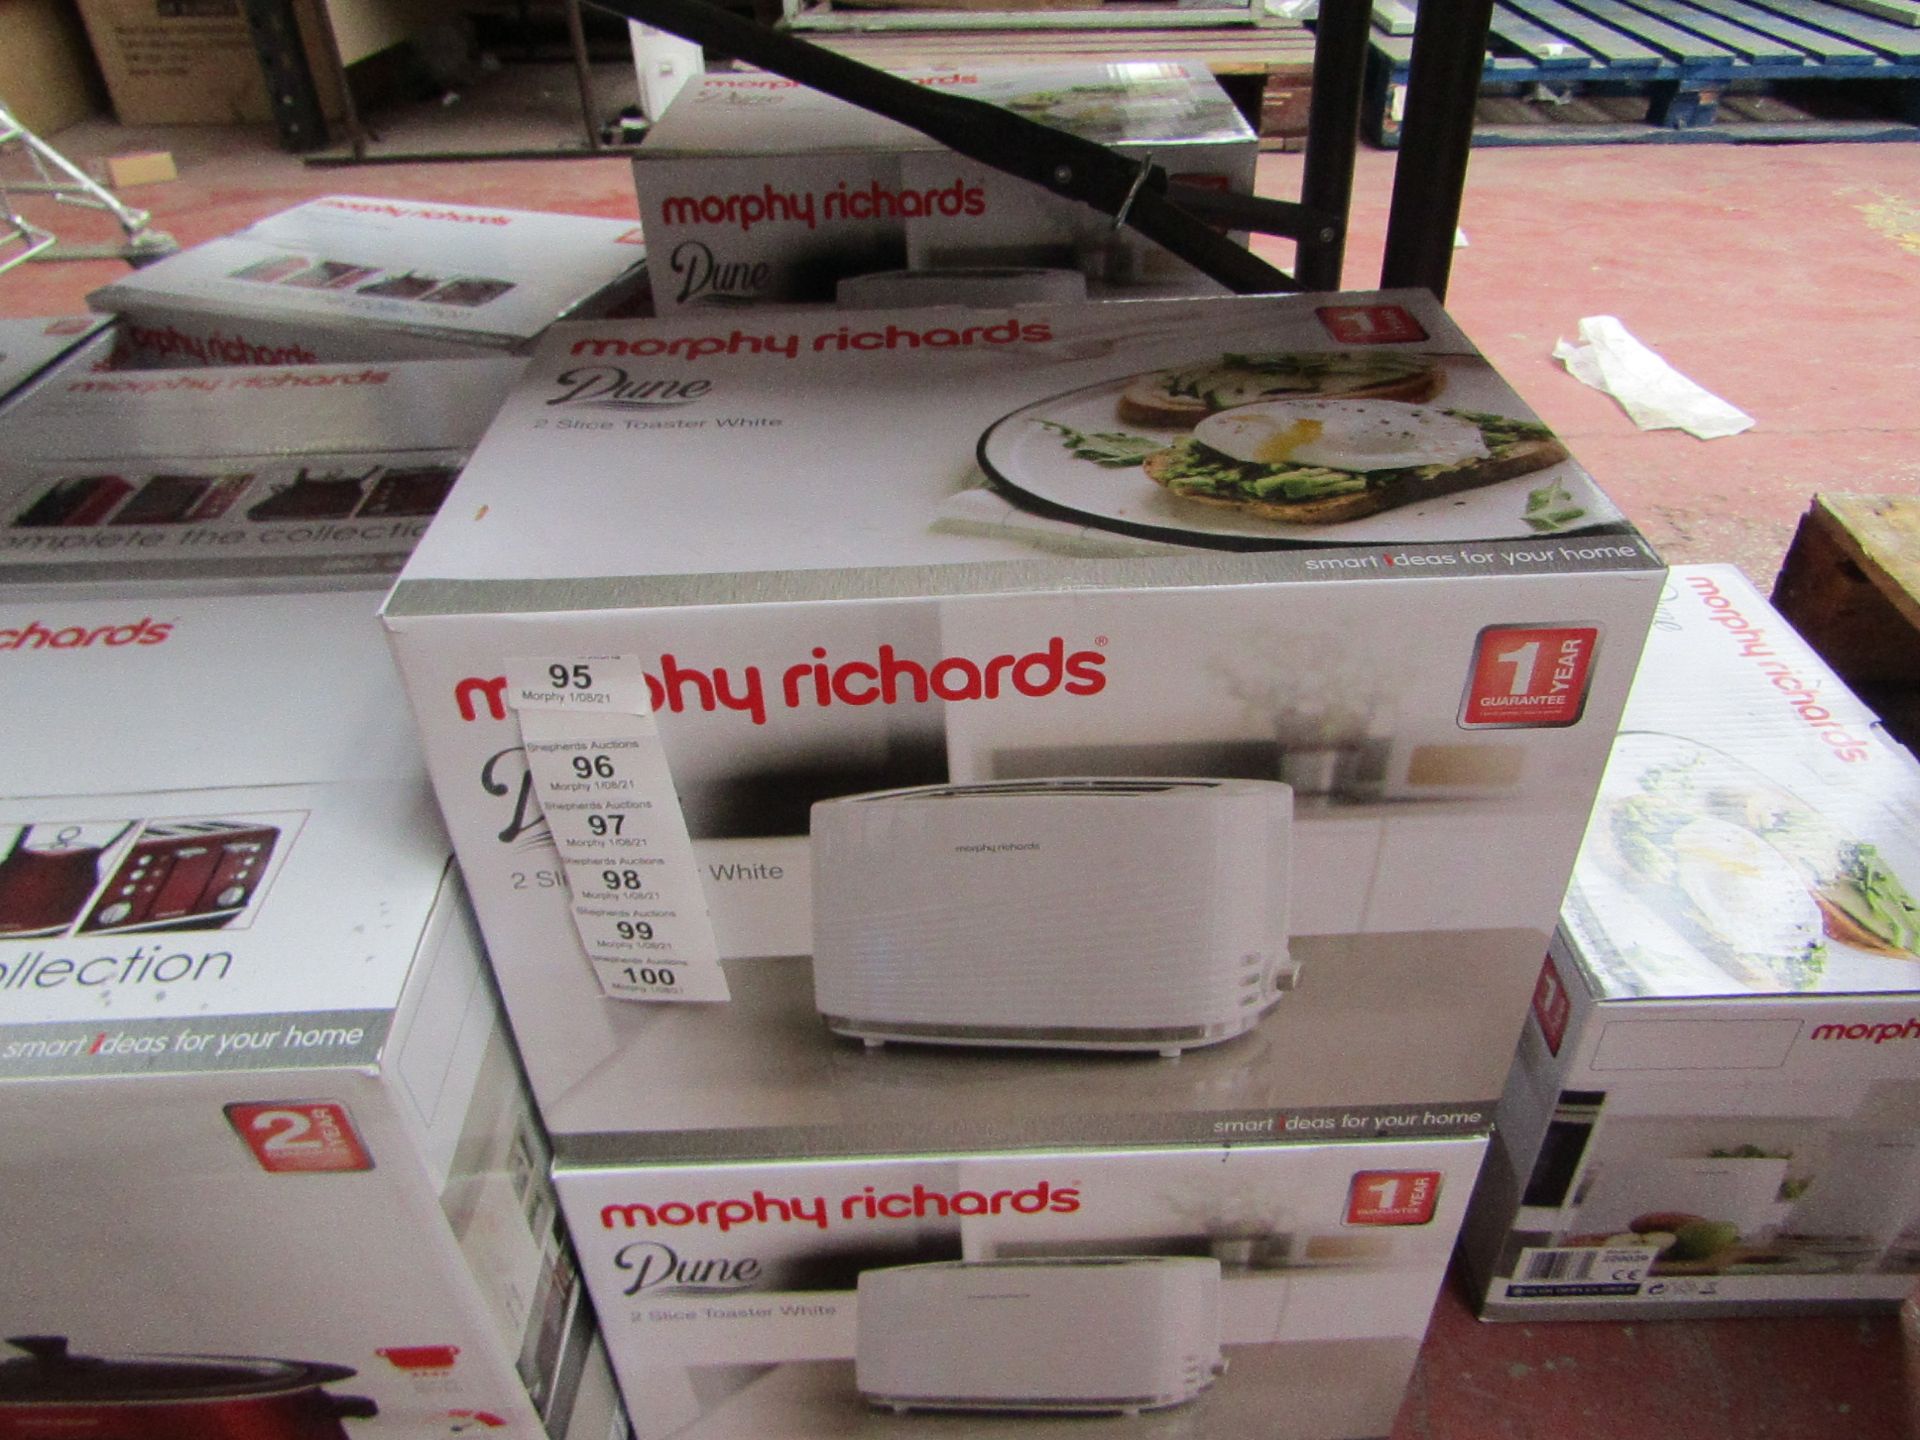 Morphy Richards Dune 2 slice toaster in white, brand new and boxed. RRP £21.99